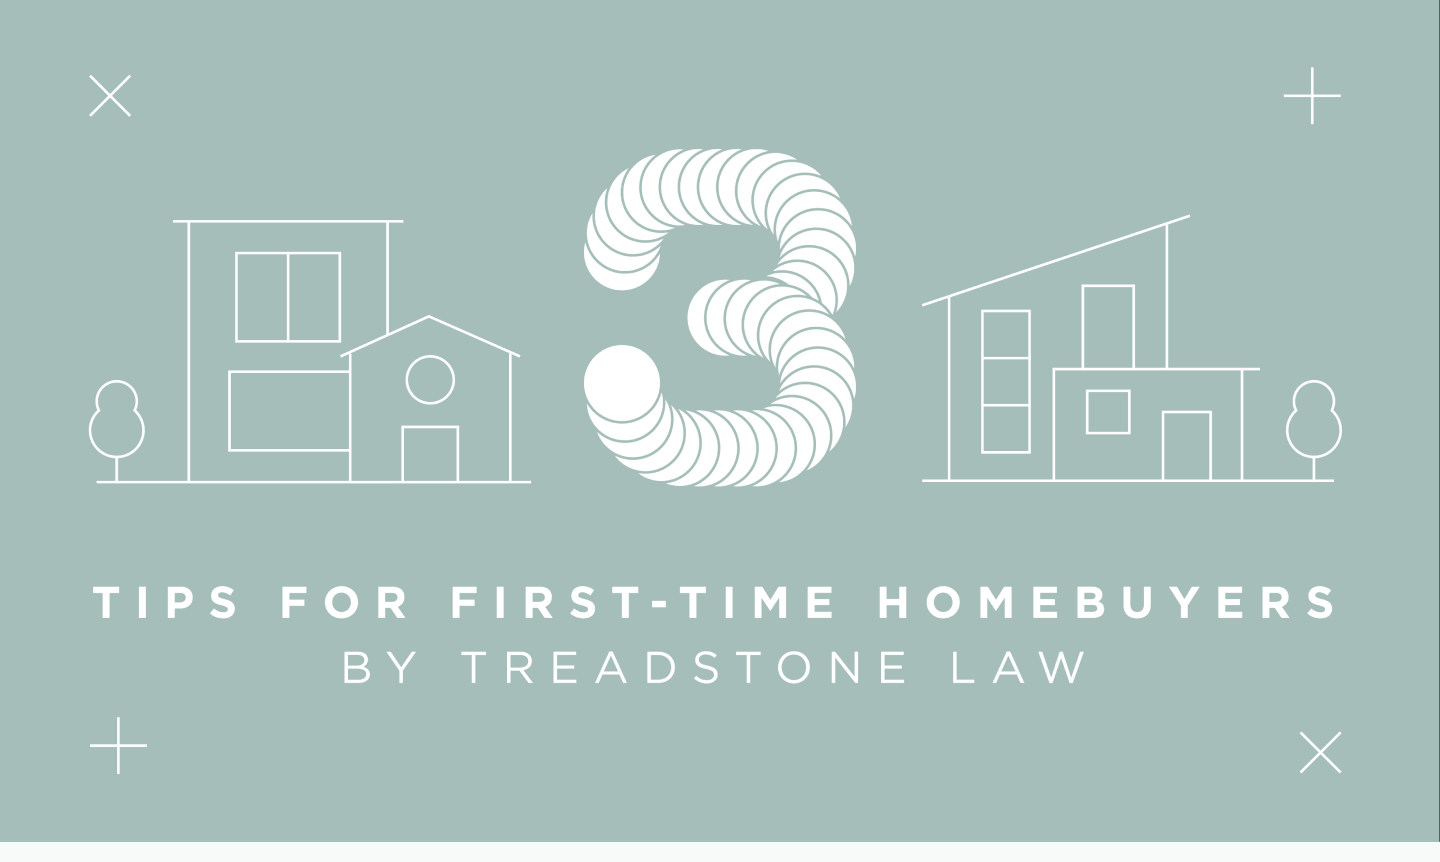 Reduce stress when buying your first home by better understanding the process, and use these three tips from Treadstone Law to reach homeownership like a pro.